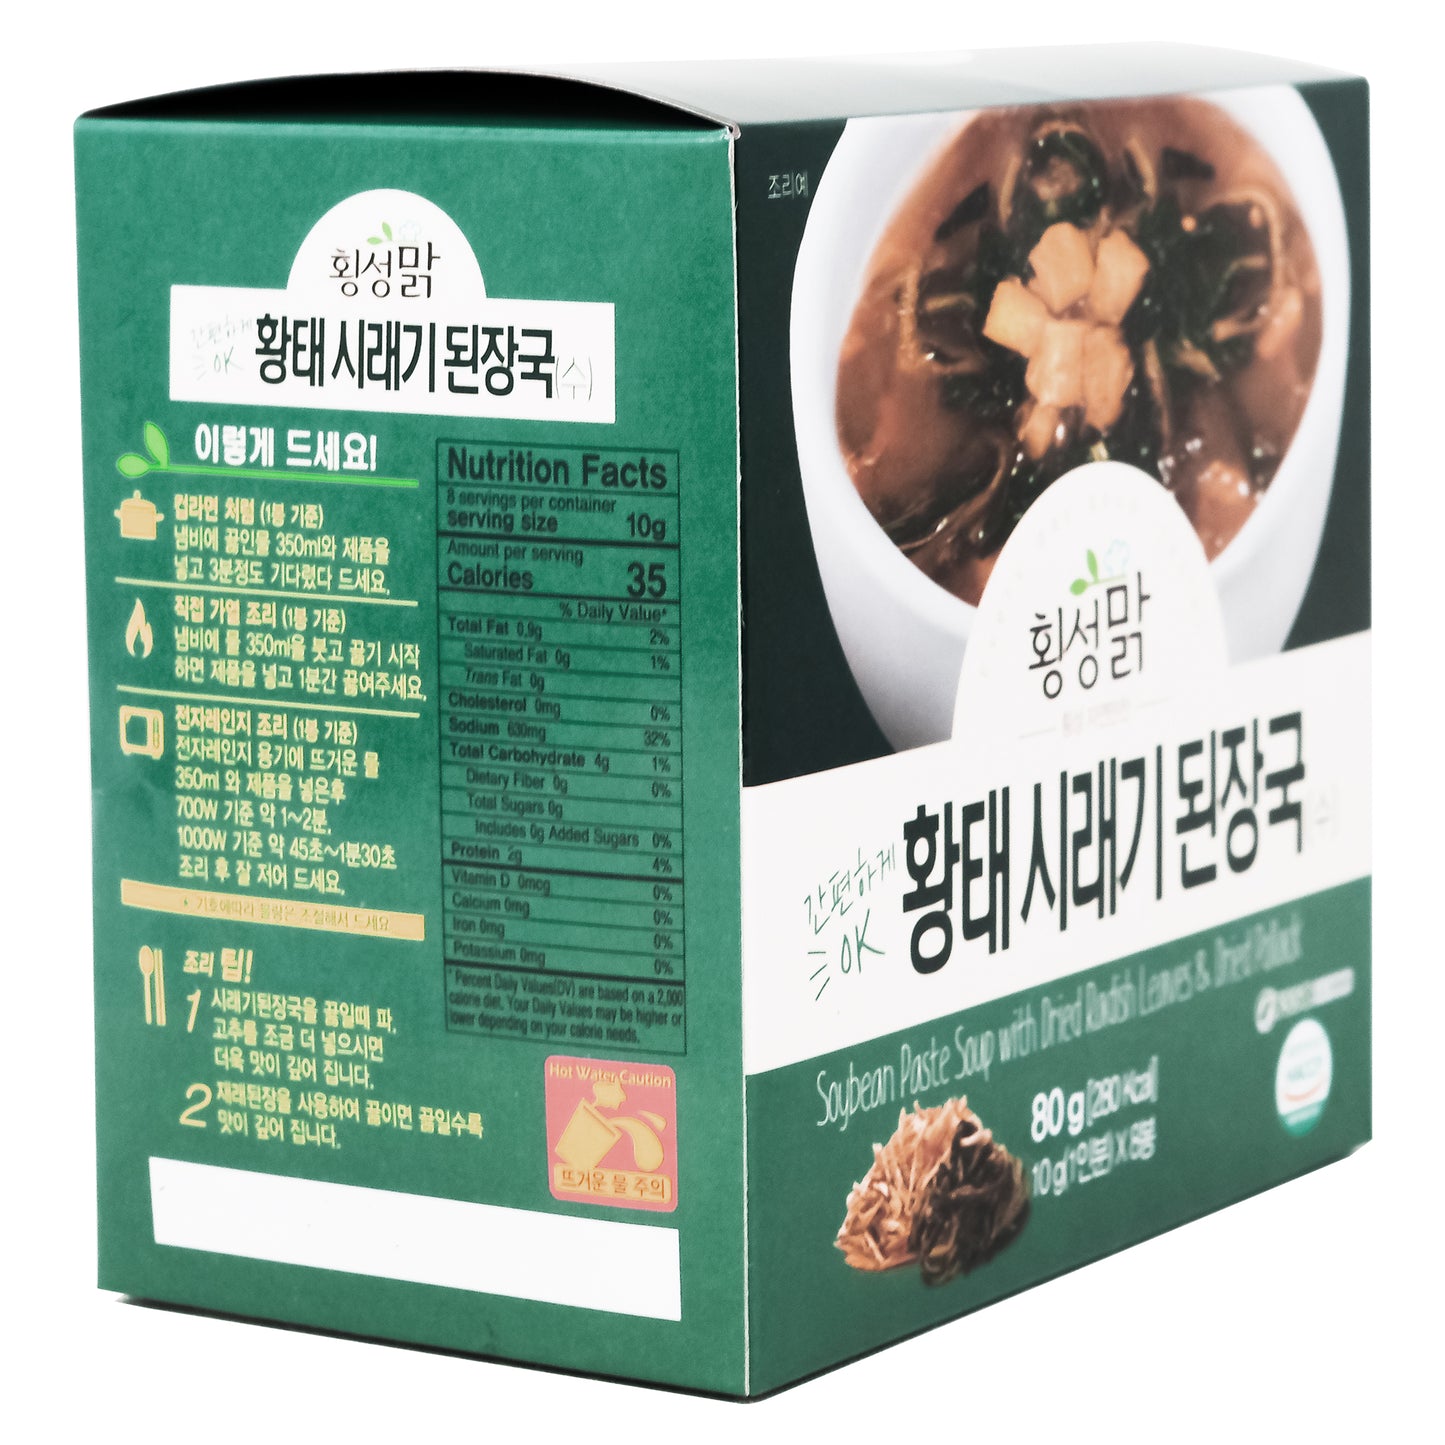 Korean Traditional Soup Soybean Paste soup with dried radish Leaves and dried Pollack Easy Cooking Tasty Soup Freeze Drying Block-Type Individual Packaging Korean Soup gh황태시래기된장국 (Soybean Paste Soup)